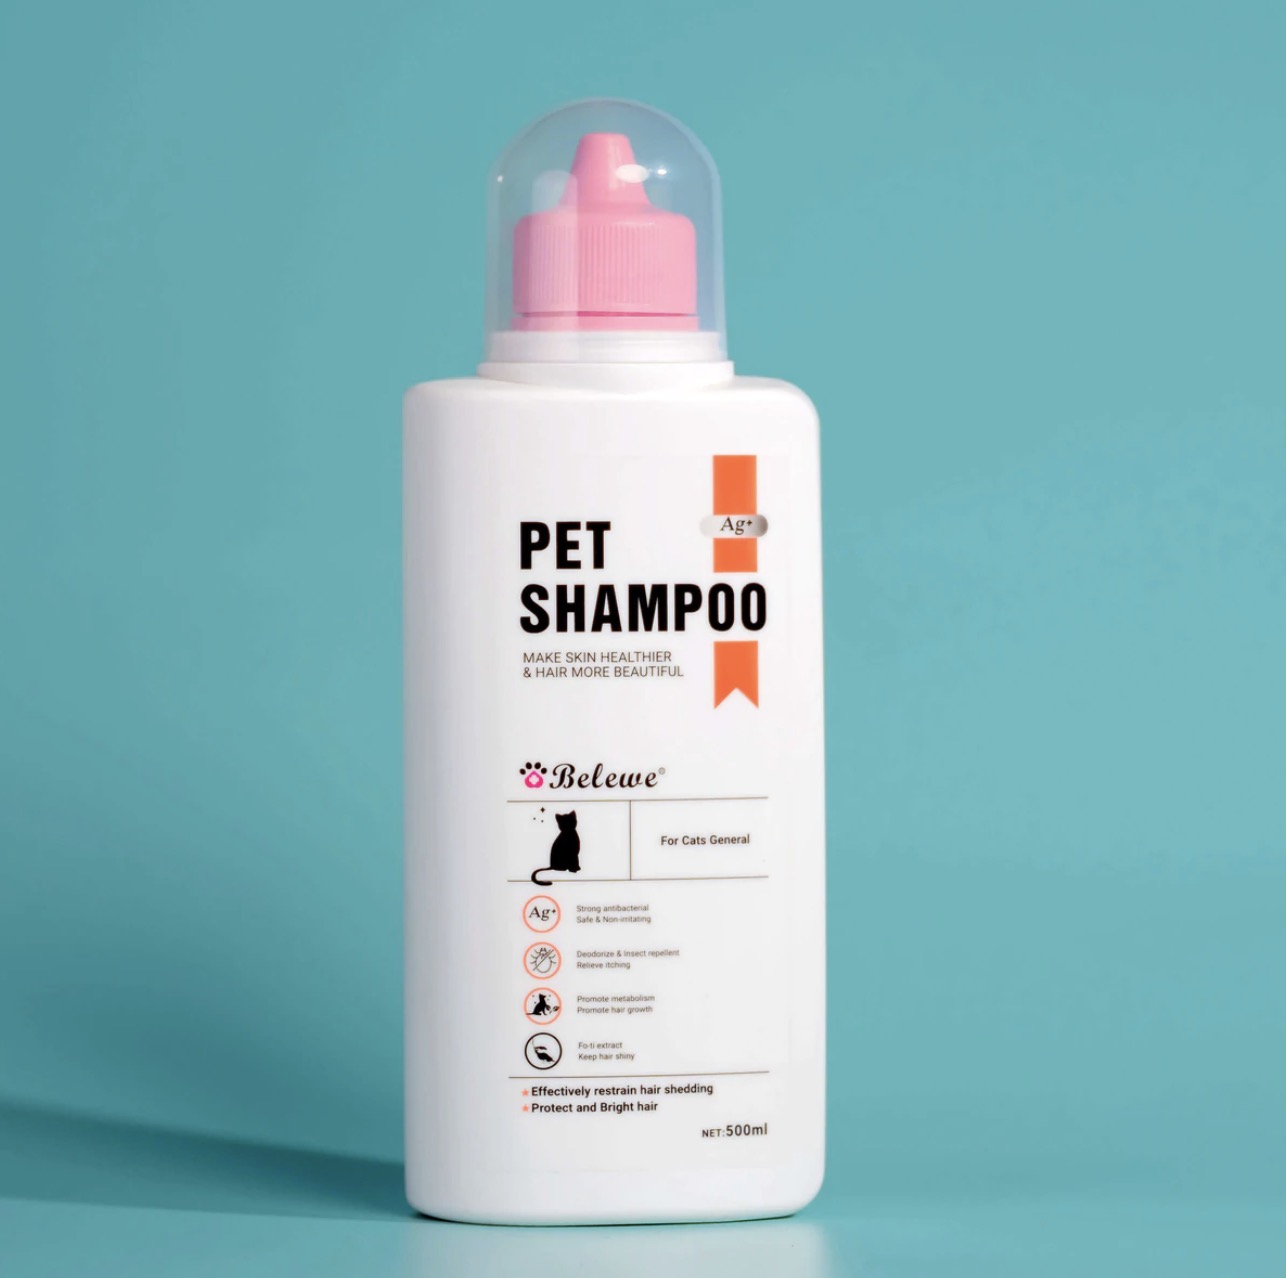 Get rid of fleas and odours with Belewe Pet All-Natural Pet Shampoo and Deodoriser